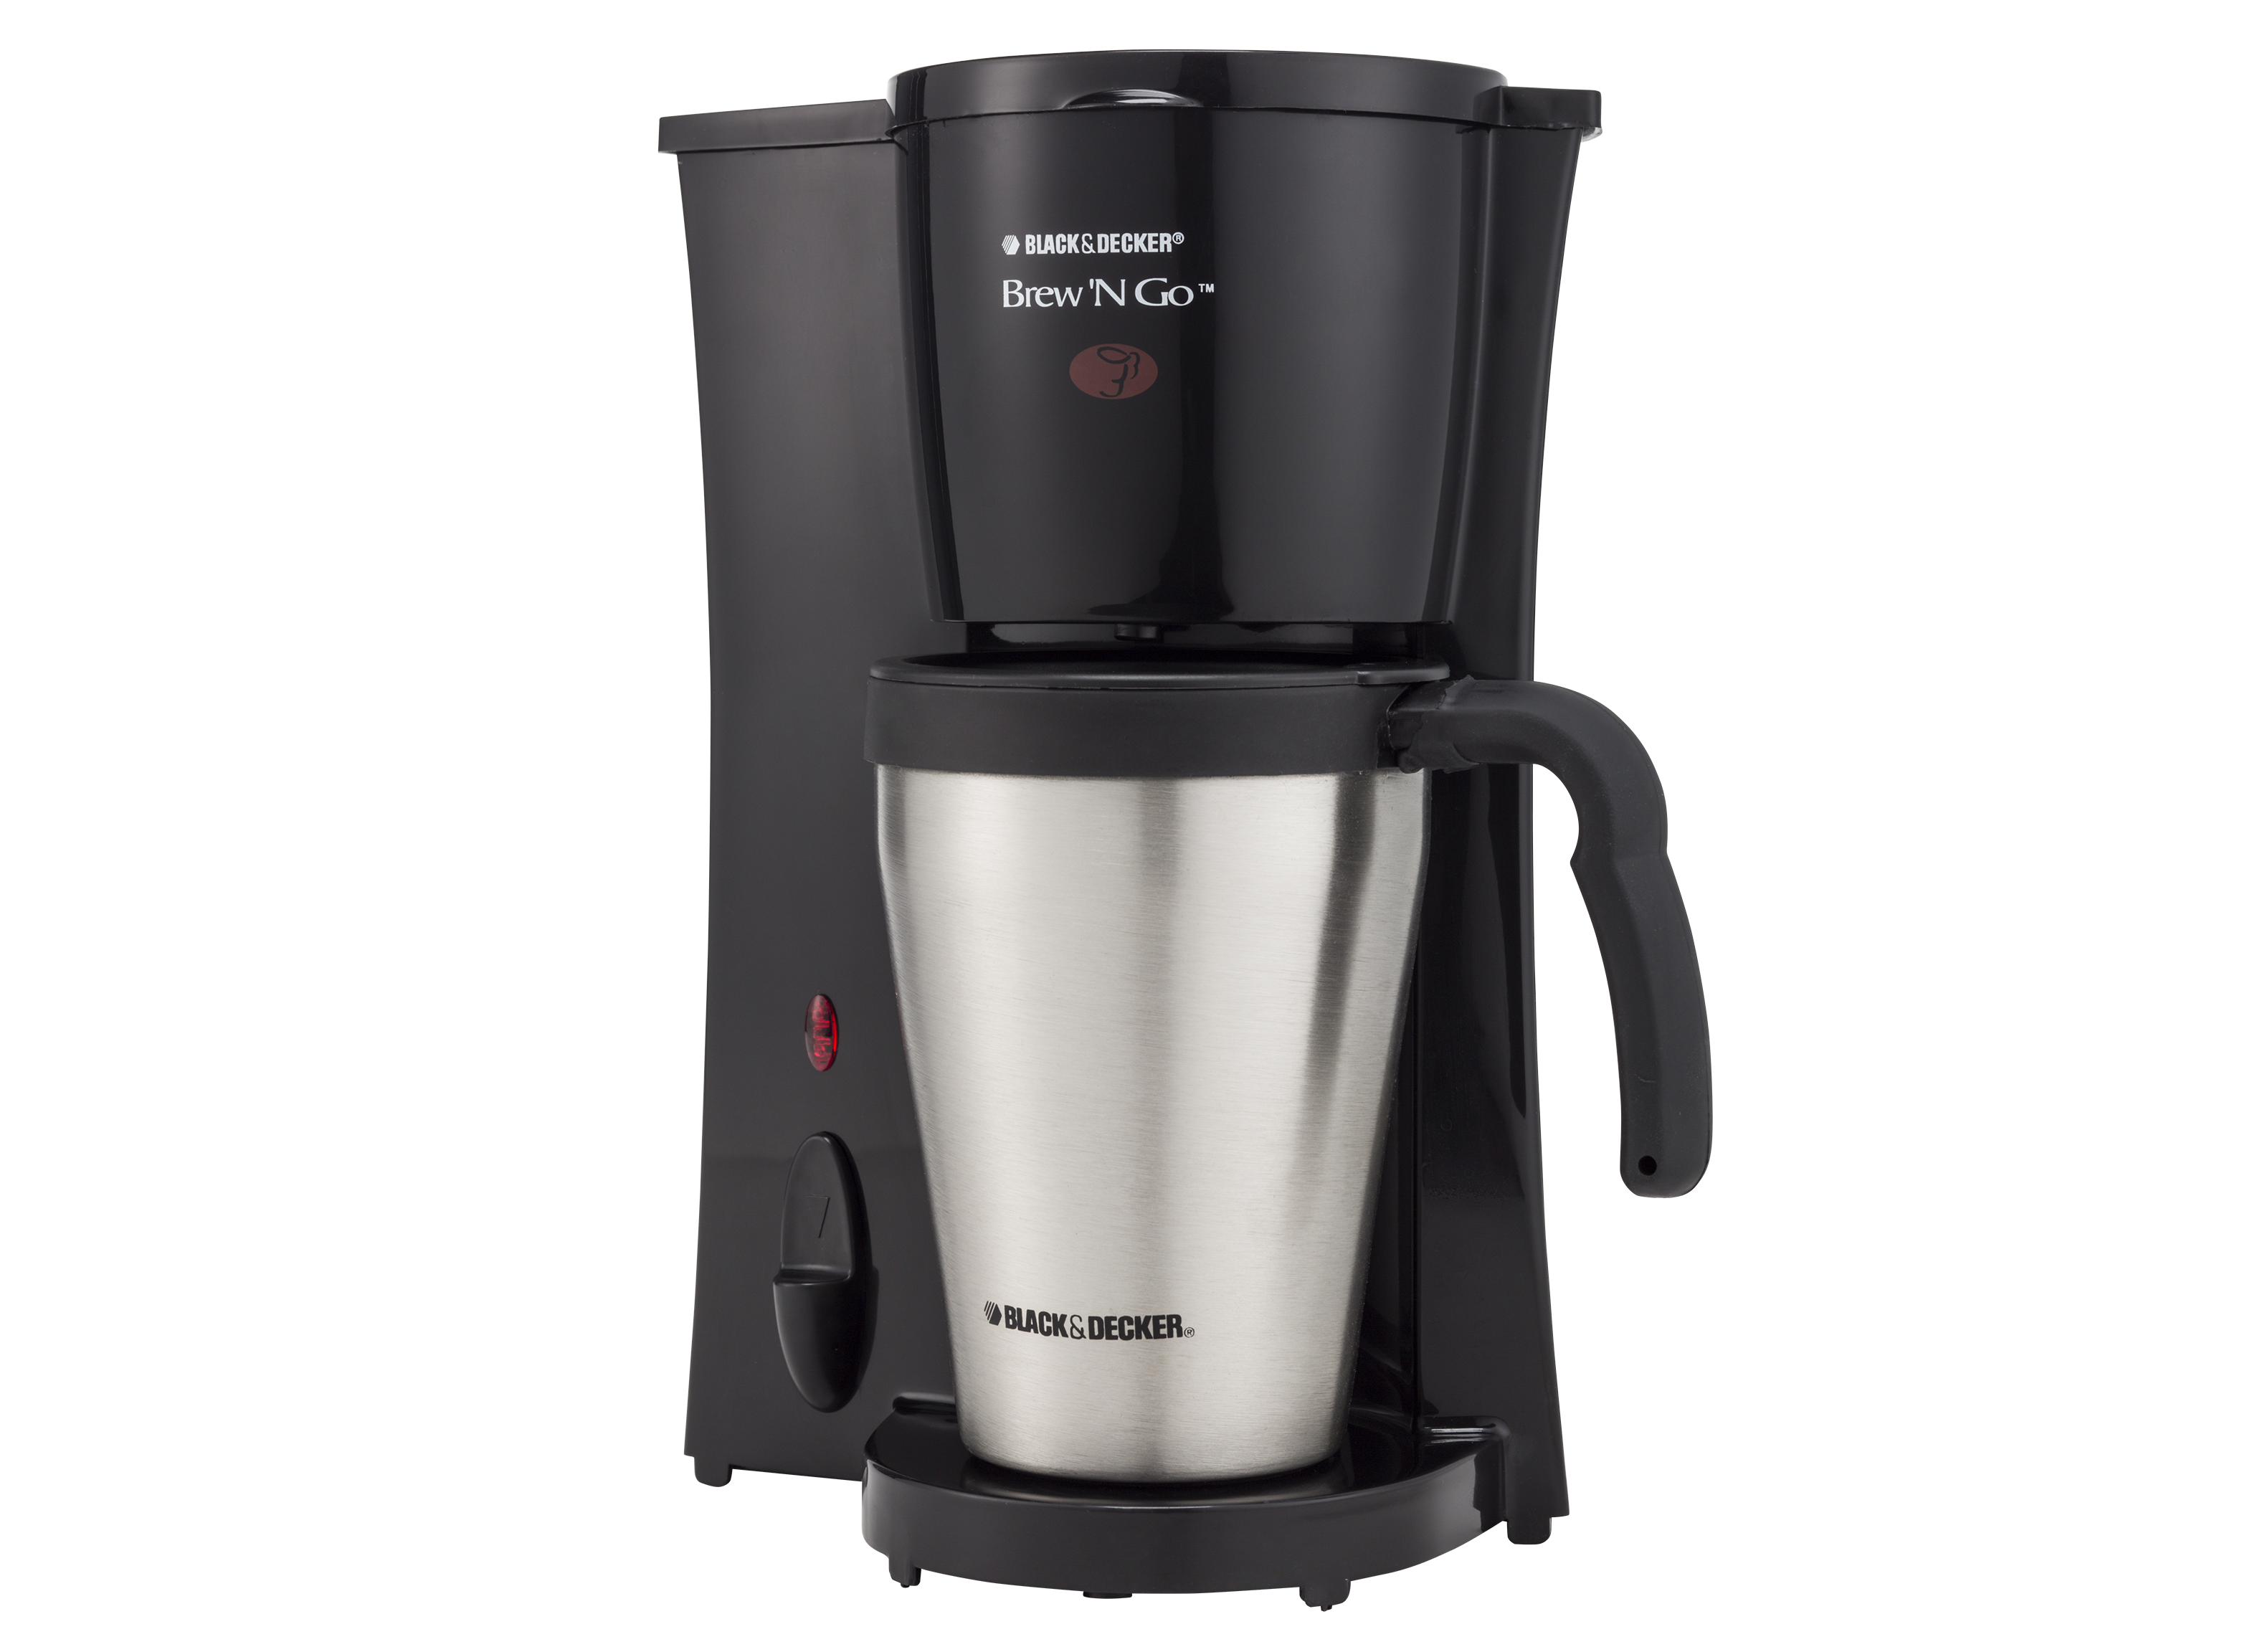 https://crdms.images.consumerreports.org/prod/products/cr/models/114932-coffeemakers-blackdecker-brewngodcm18s.png